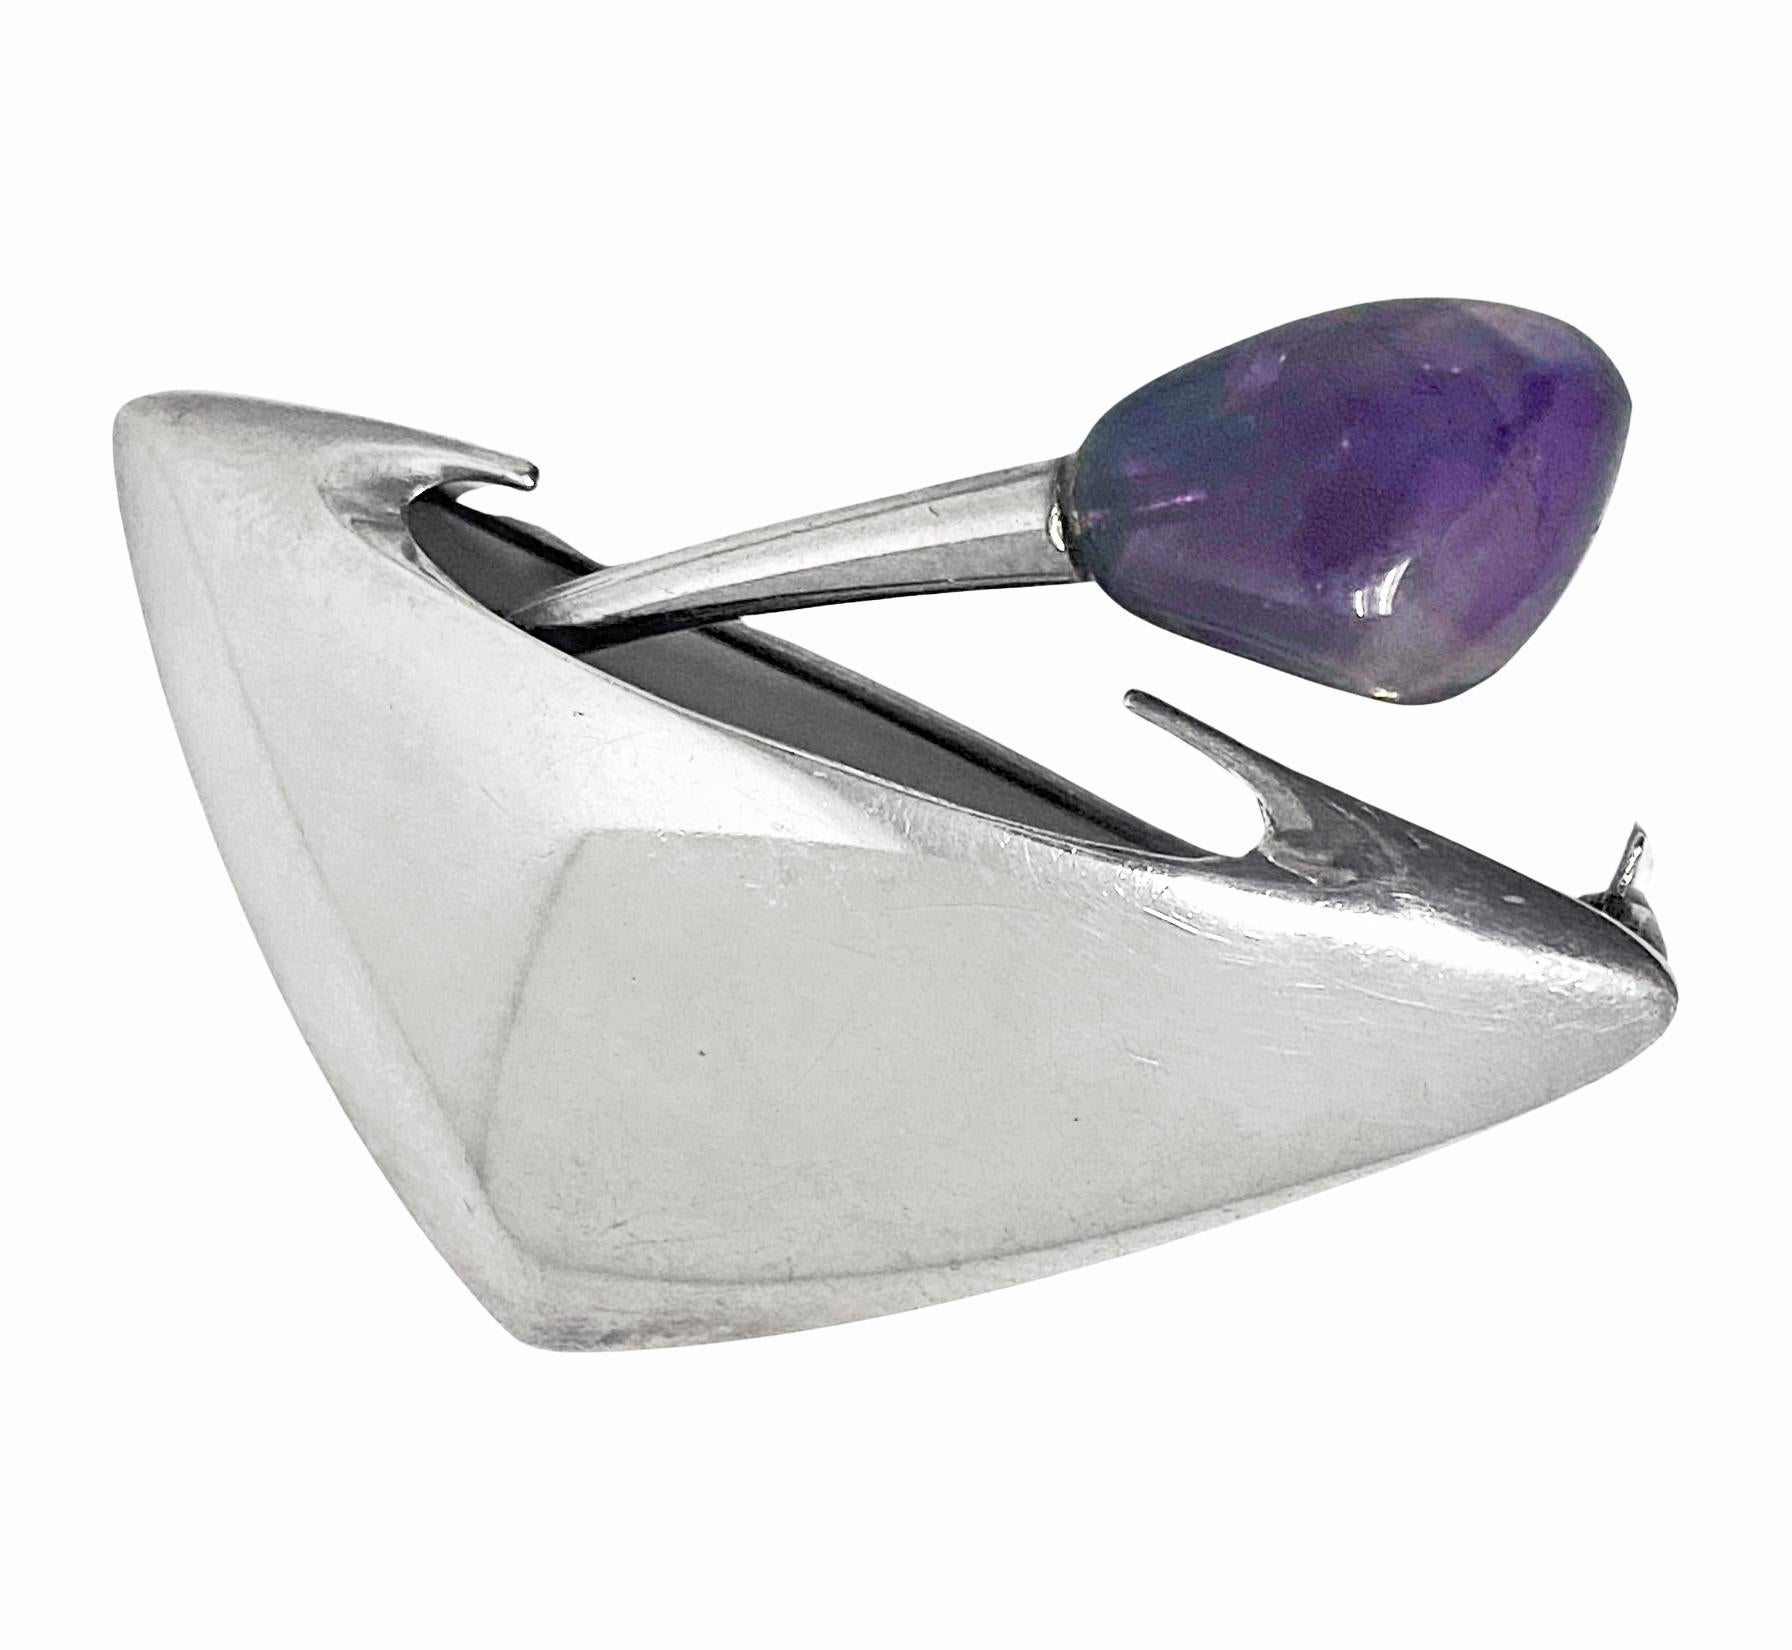 Mid century Danish Sterling N.E. From unusual pin Brooch. In an elliptical form of an amethyst `flower petal sprouting' from a plant pot. Measures approximately 2.10 x 1.6 inches. Item Weight: 13.91 grams. Marked Sterling Denmark 925S N.E. From